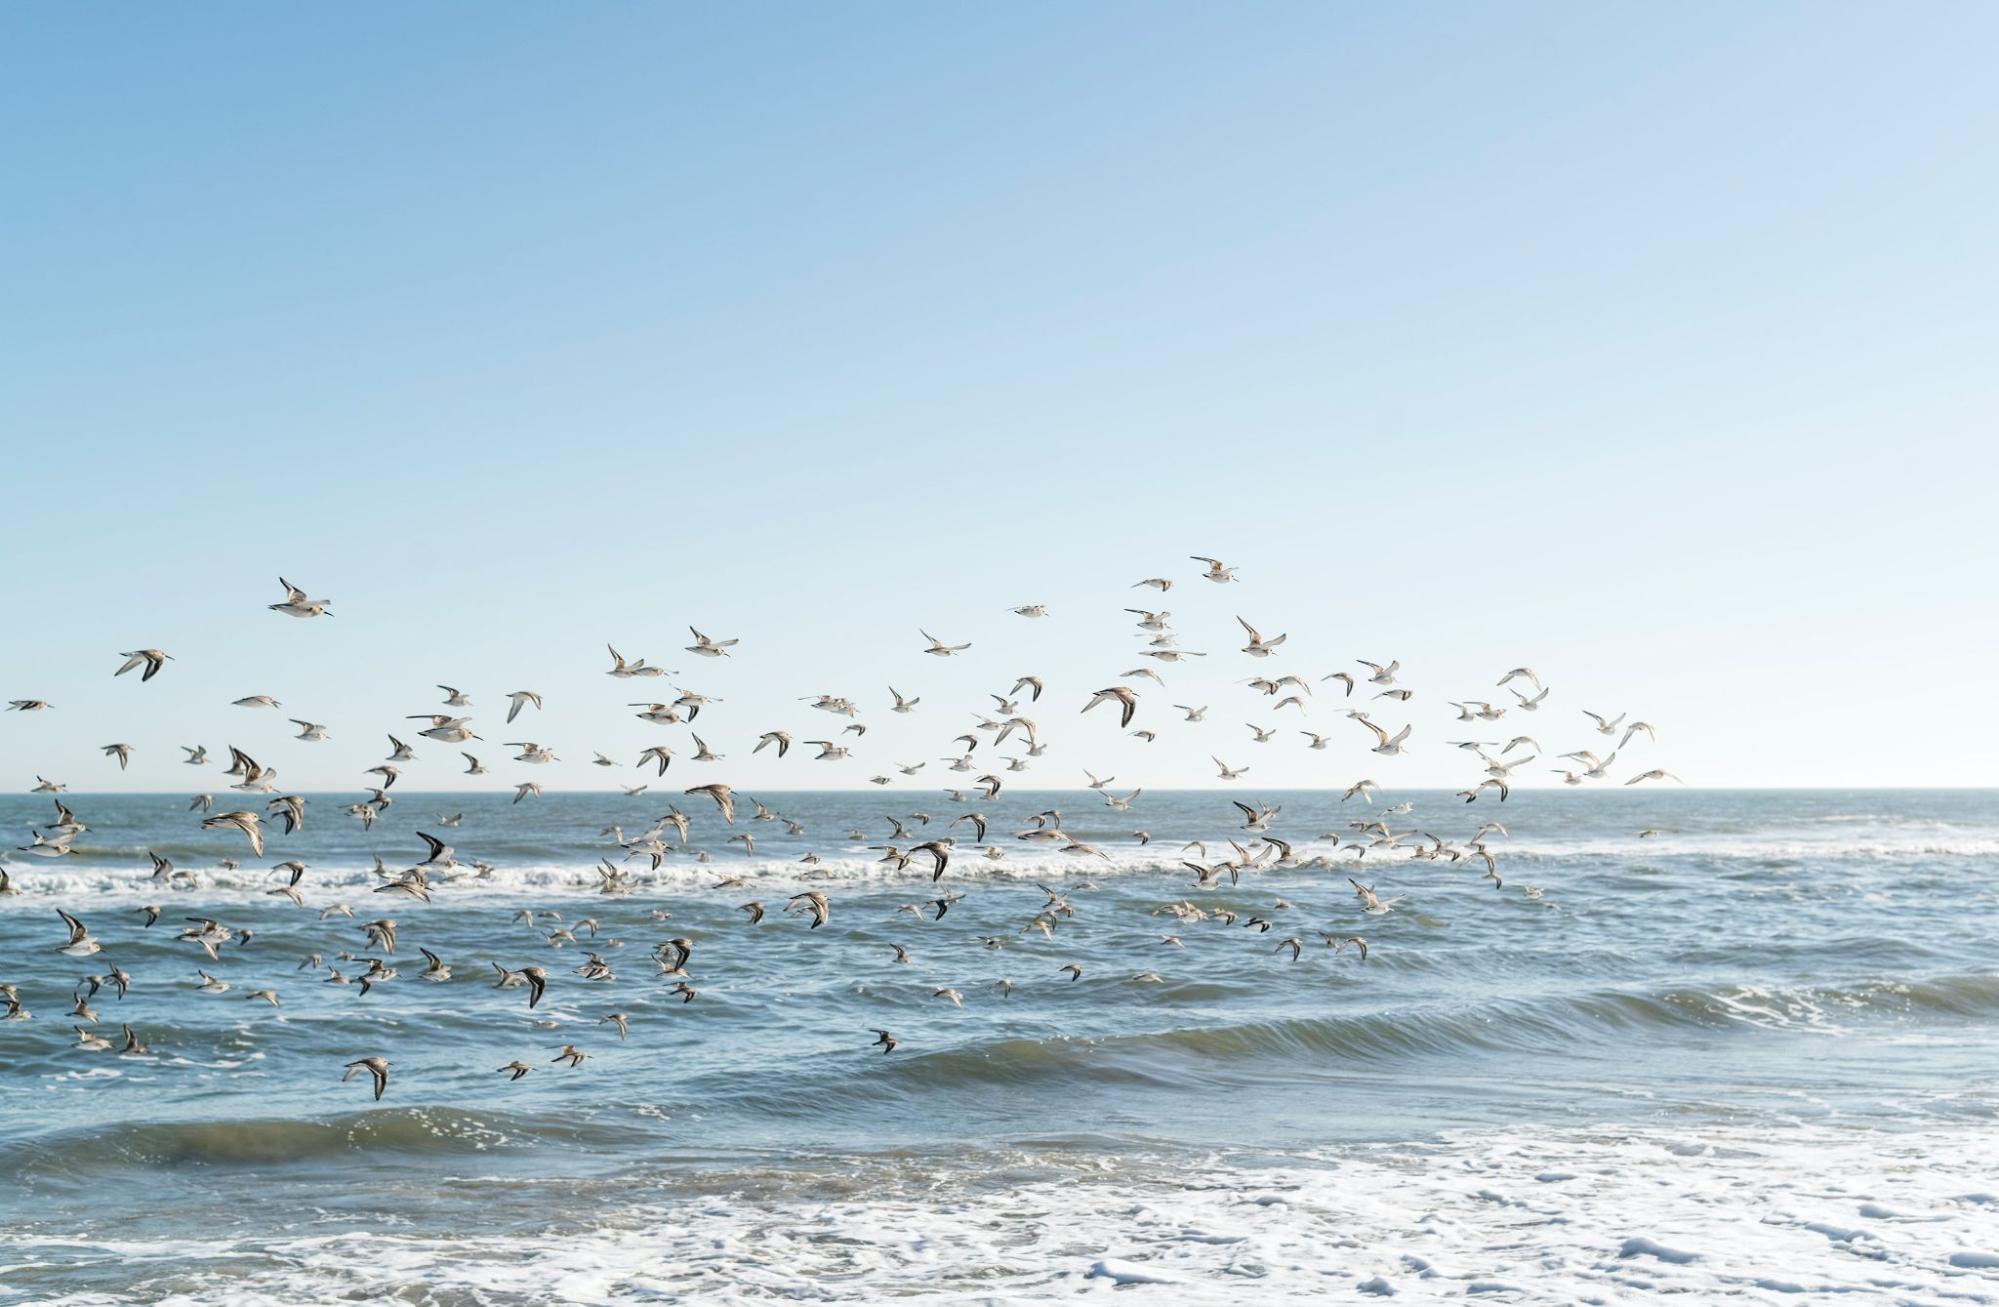 Flock of seaguls flying in formation on a beach